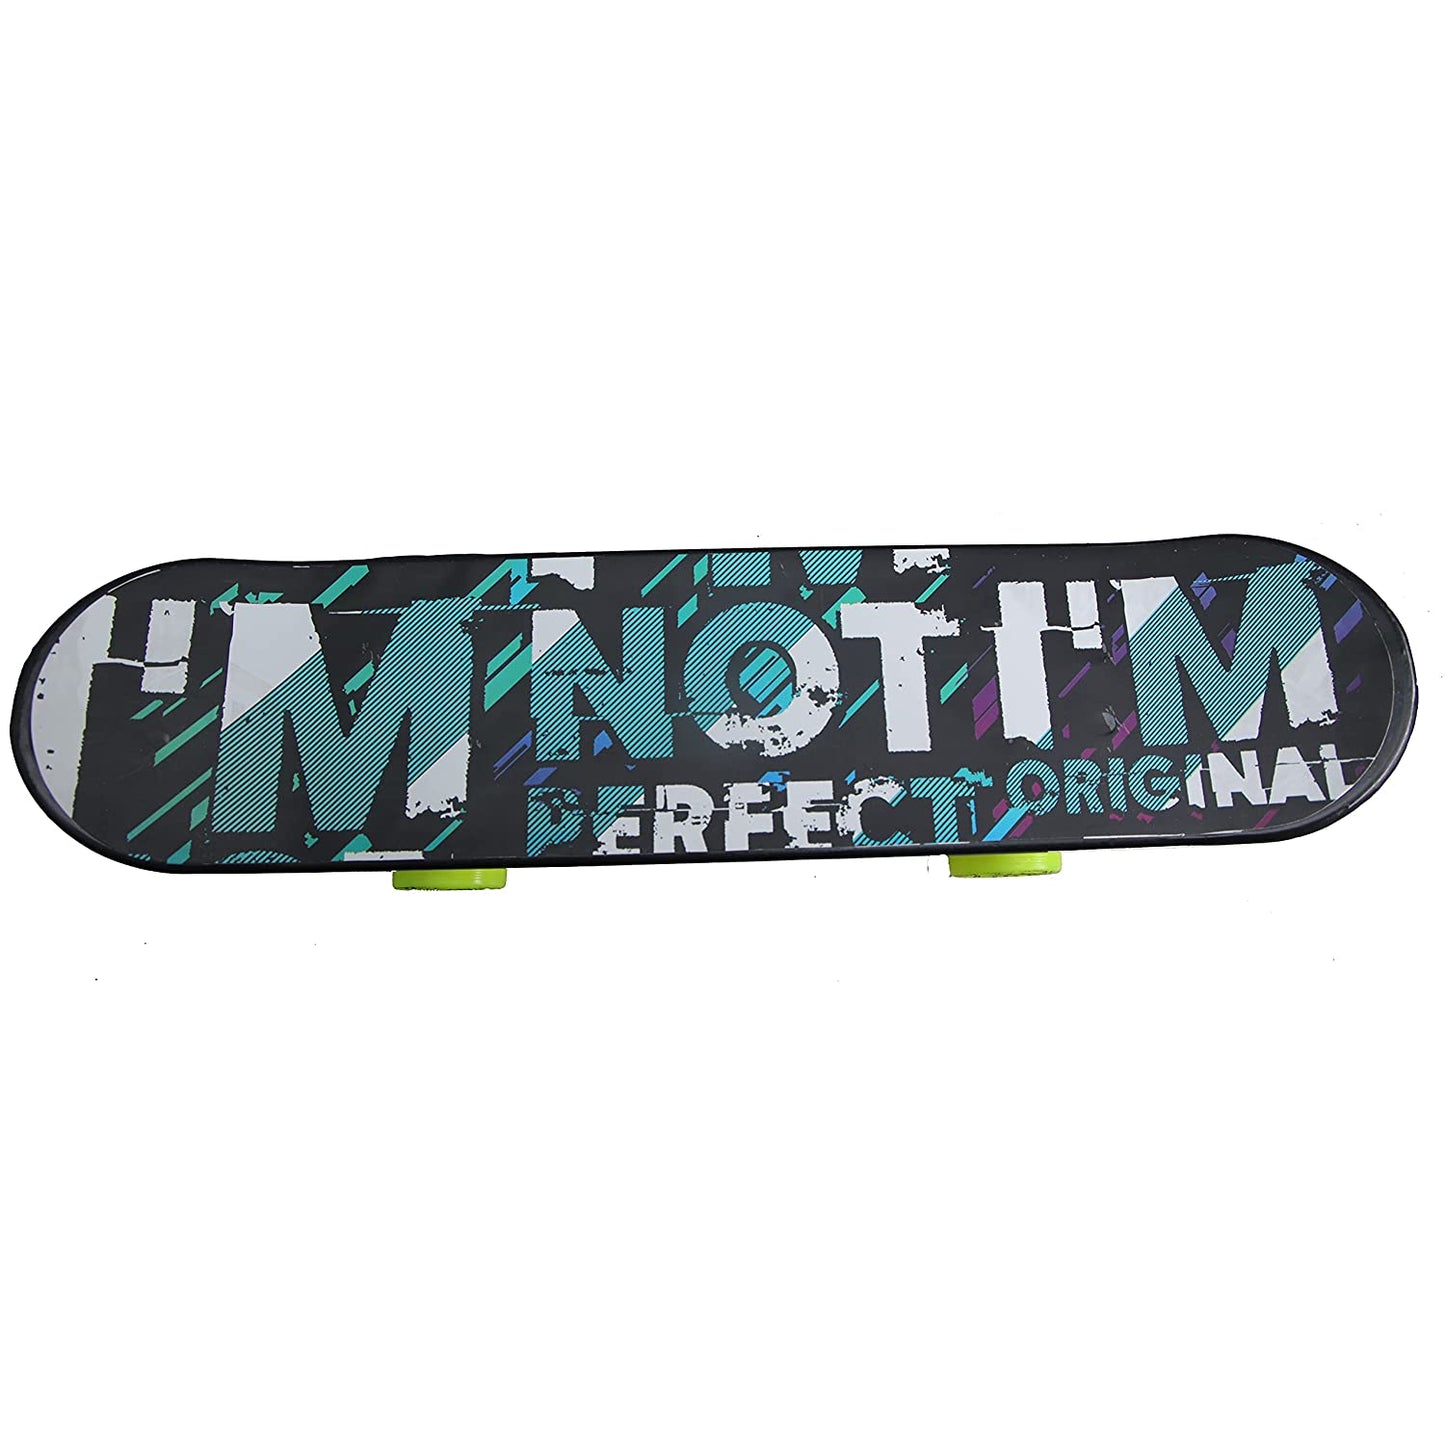 Skateboard, Fiber Specially Designed With A Pro Pattern & Length Of 27" X 6.5" Width Skate Board For Boys, Skating Board For Boys